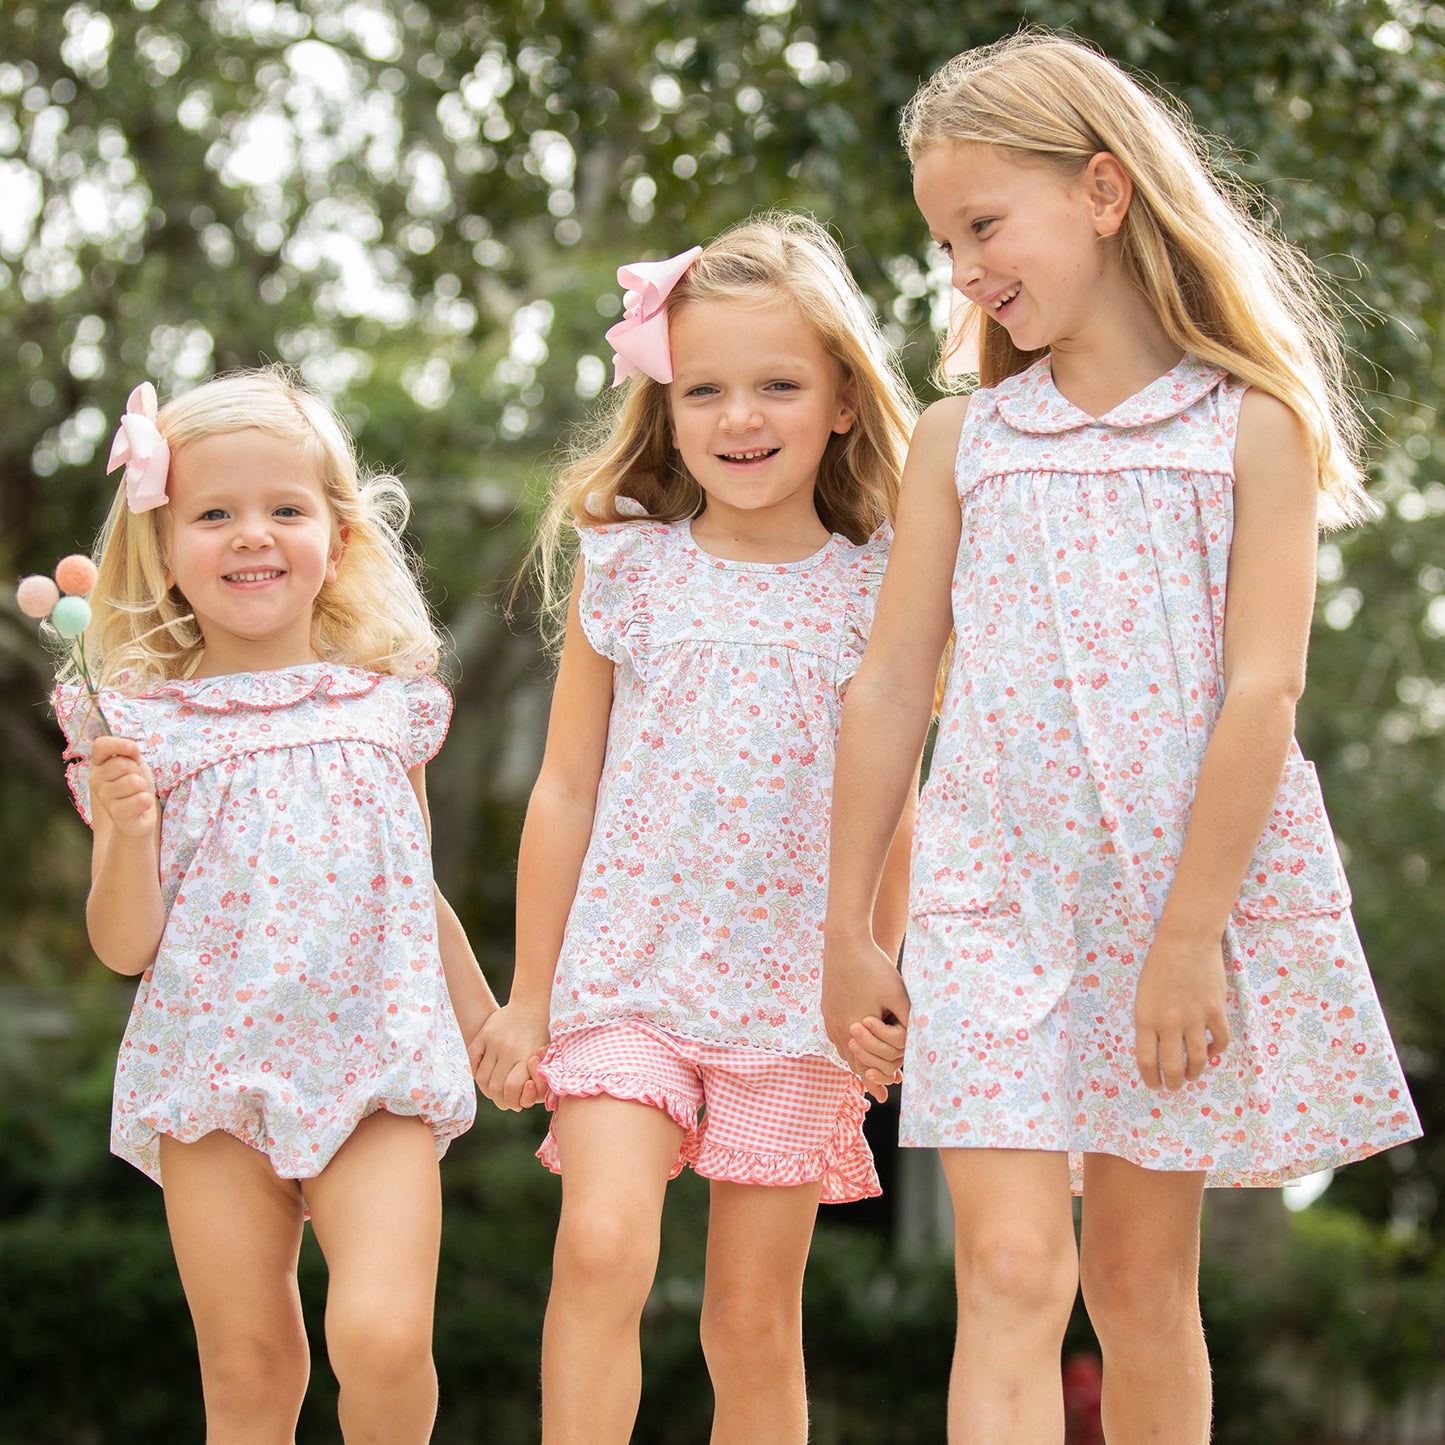 Three little girls holding hands and walking in slowered shirts and dresses